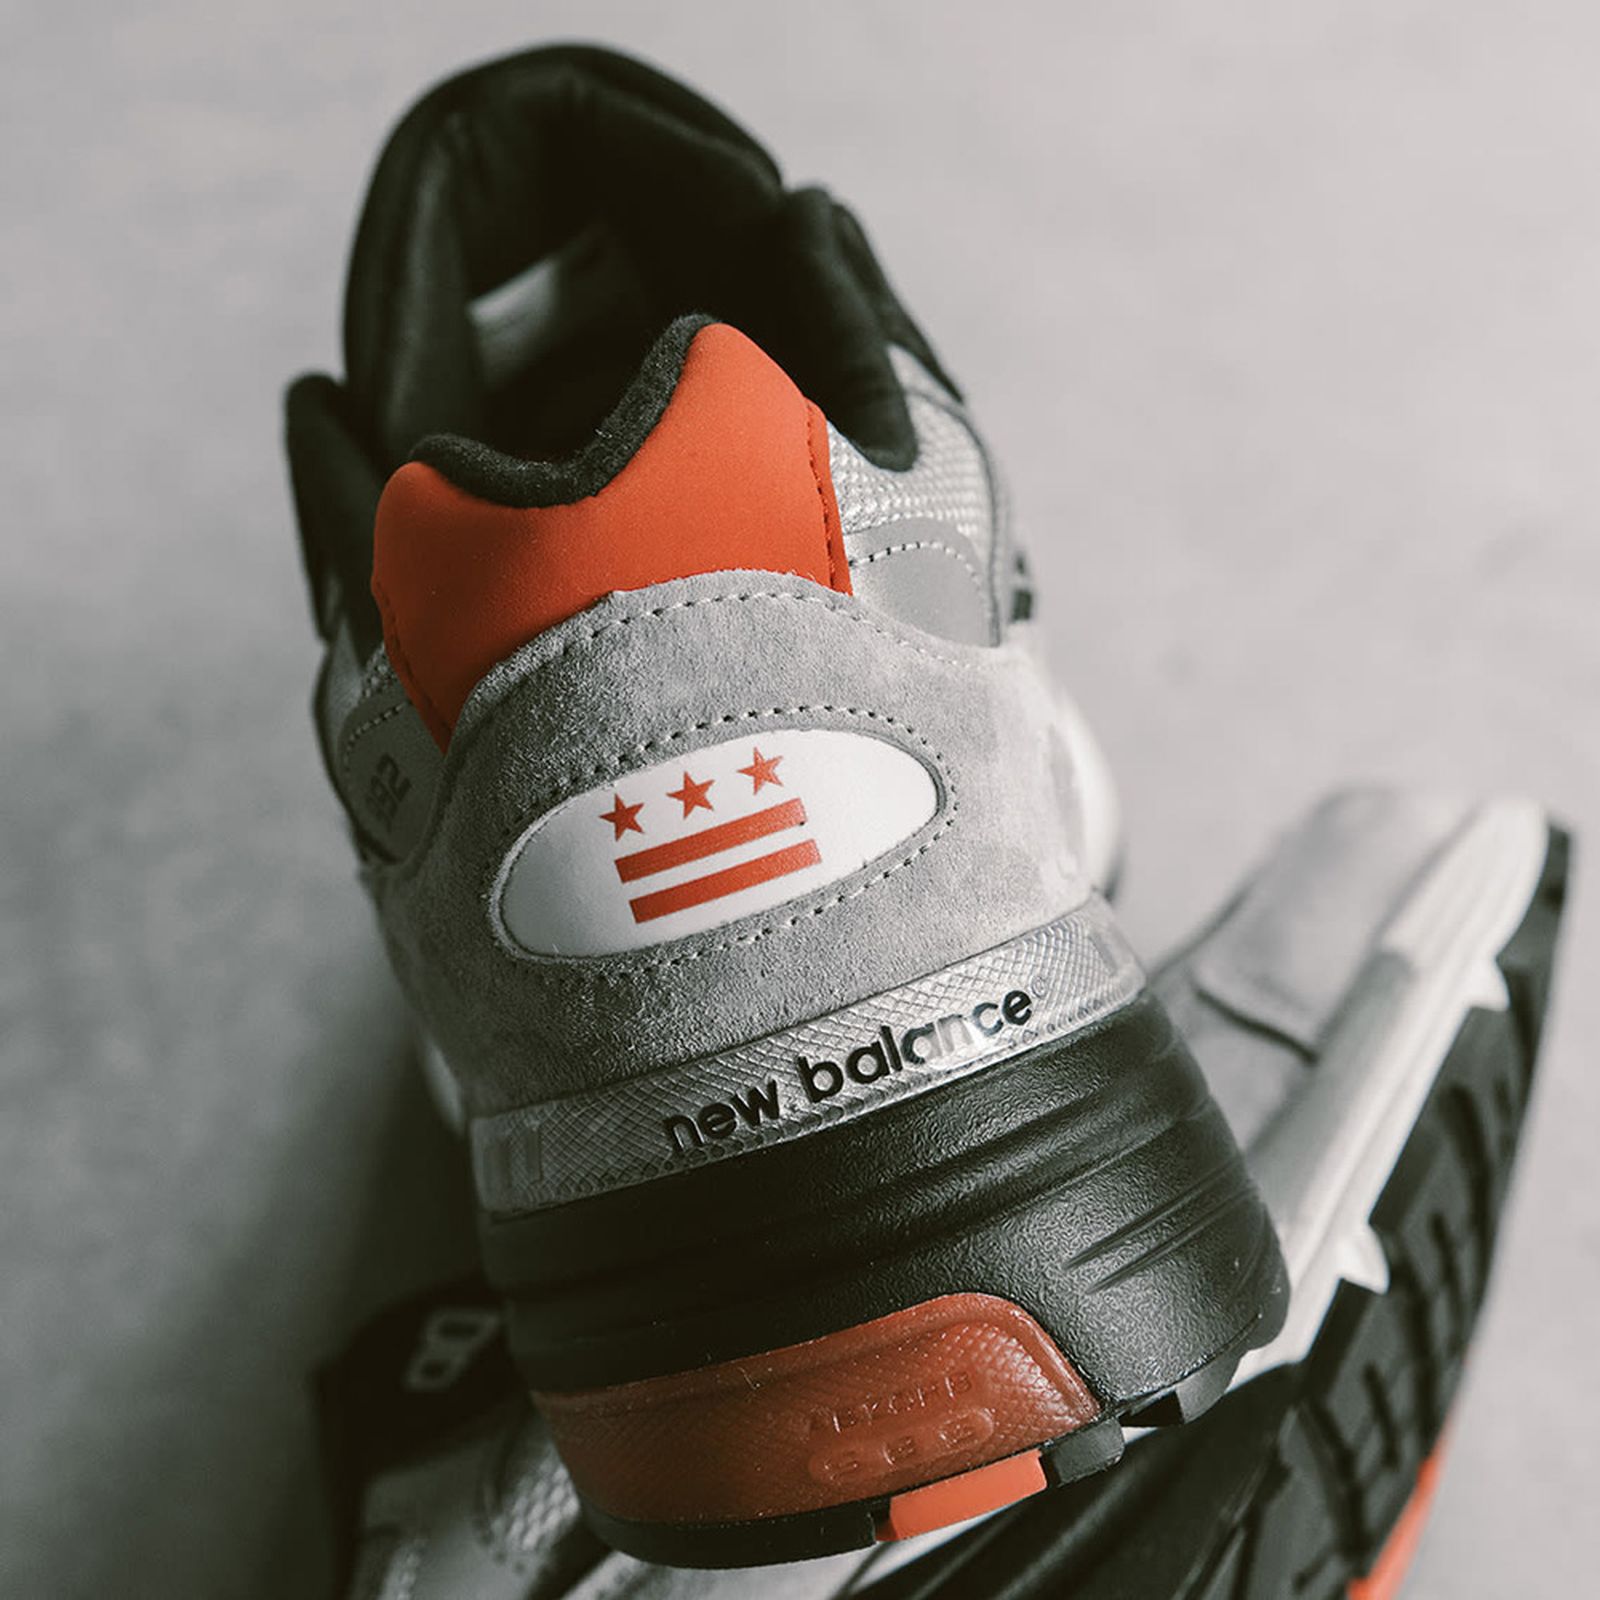 DTLR x New Balance 992: Official Images & Release Information